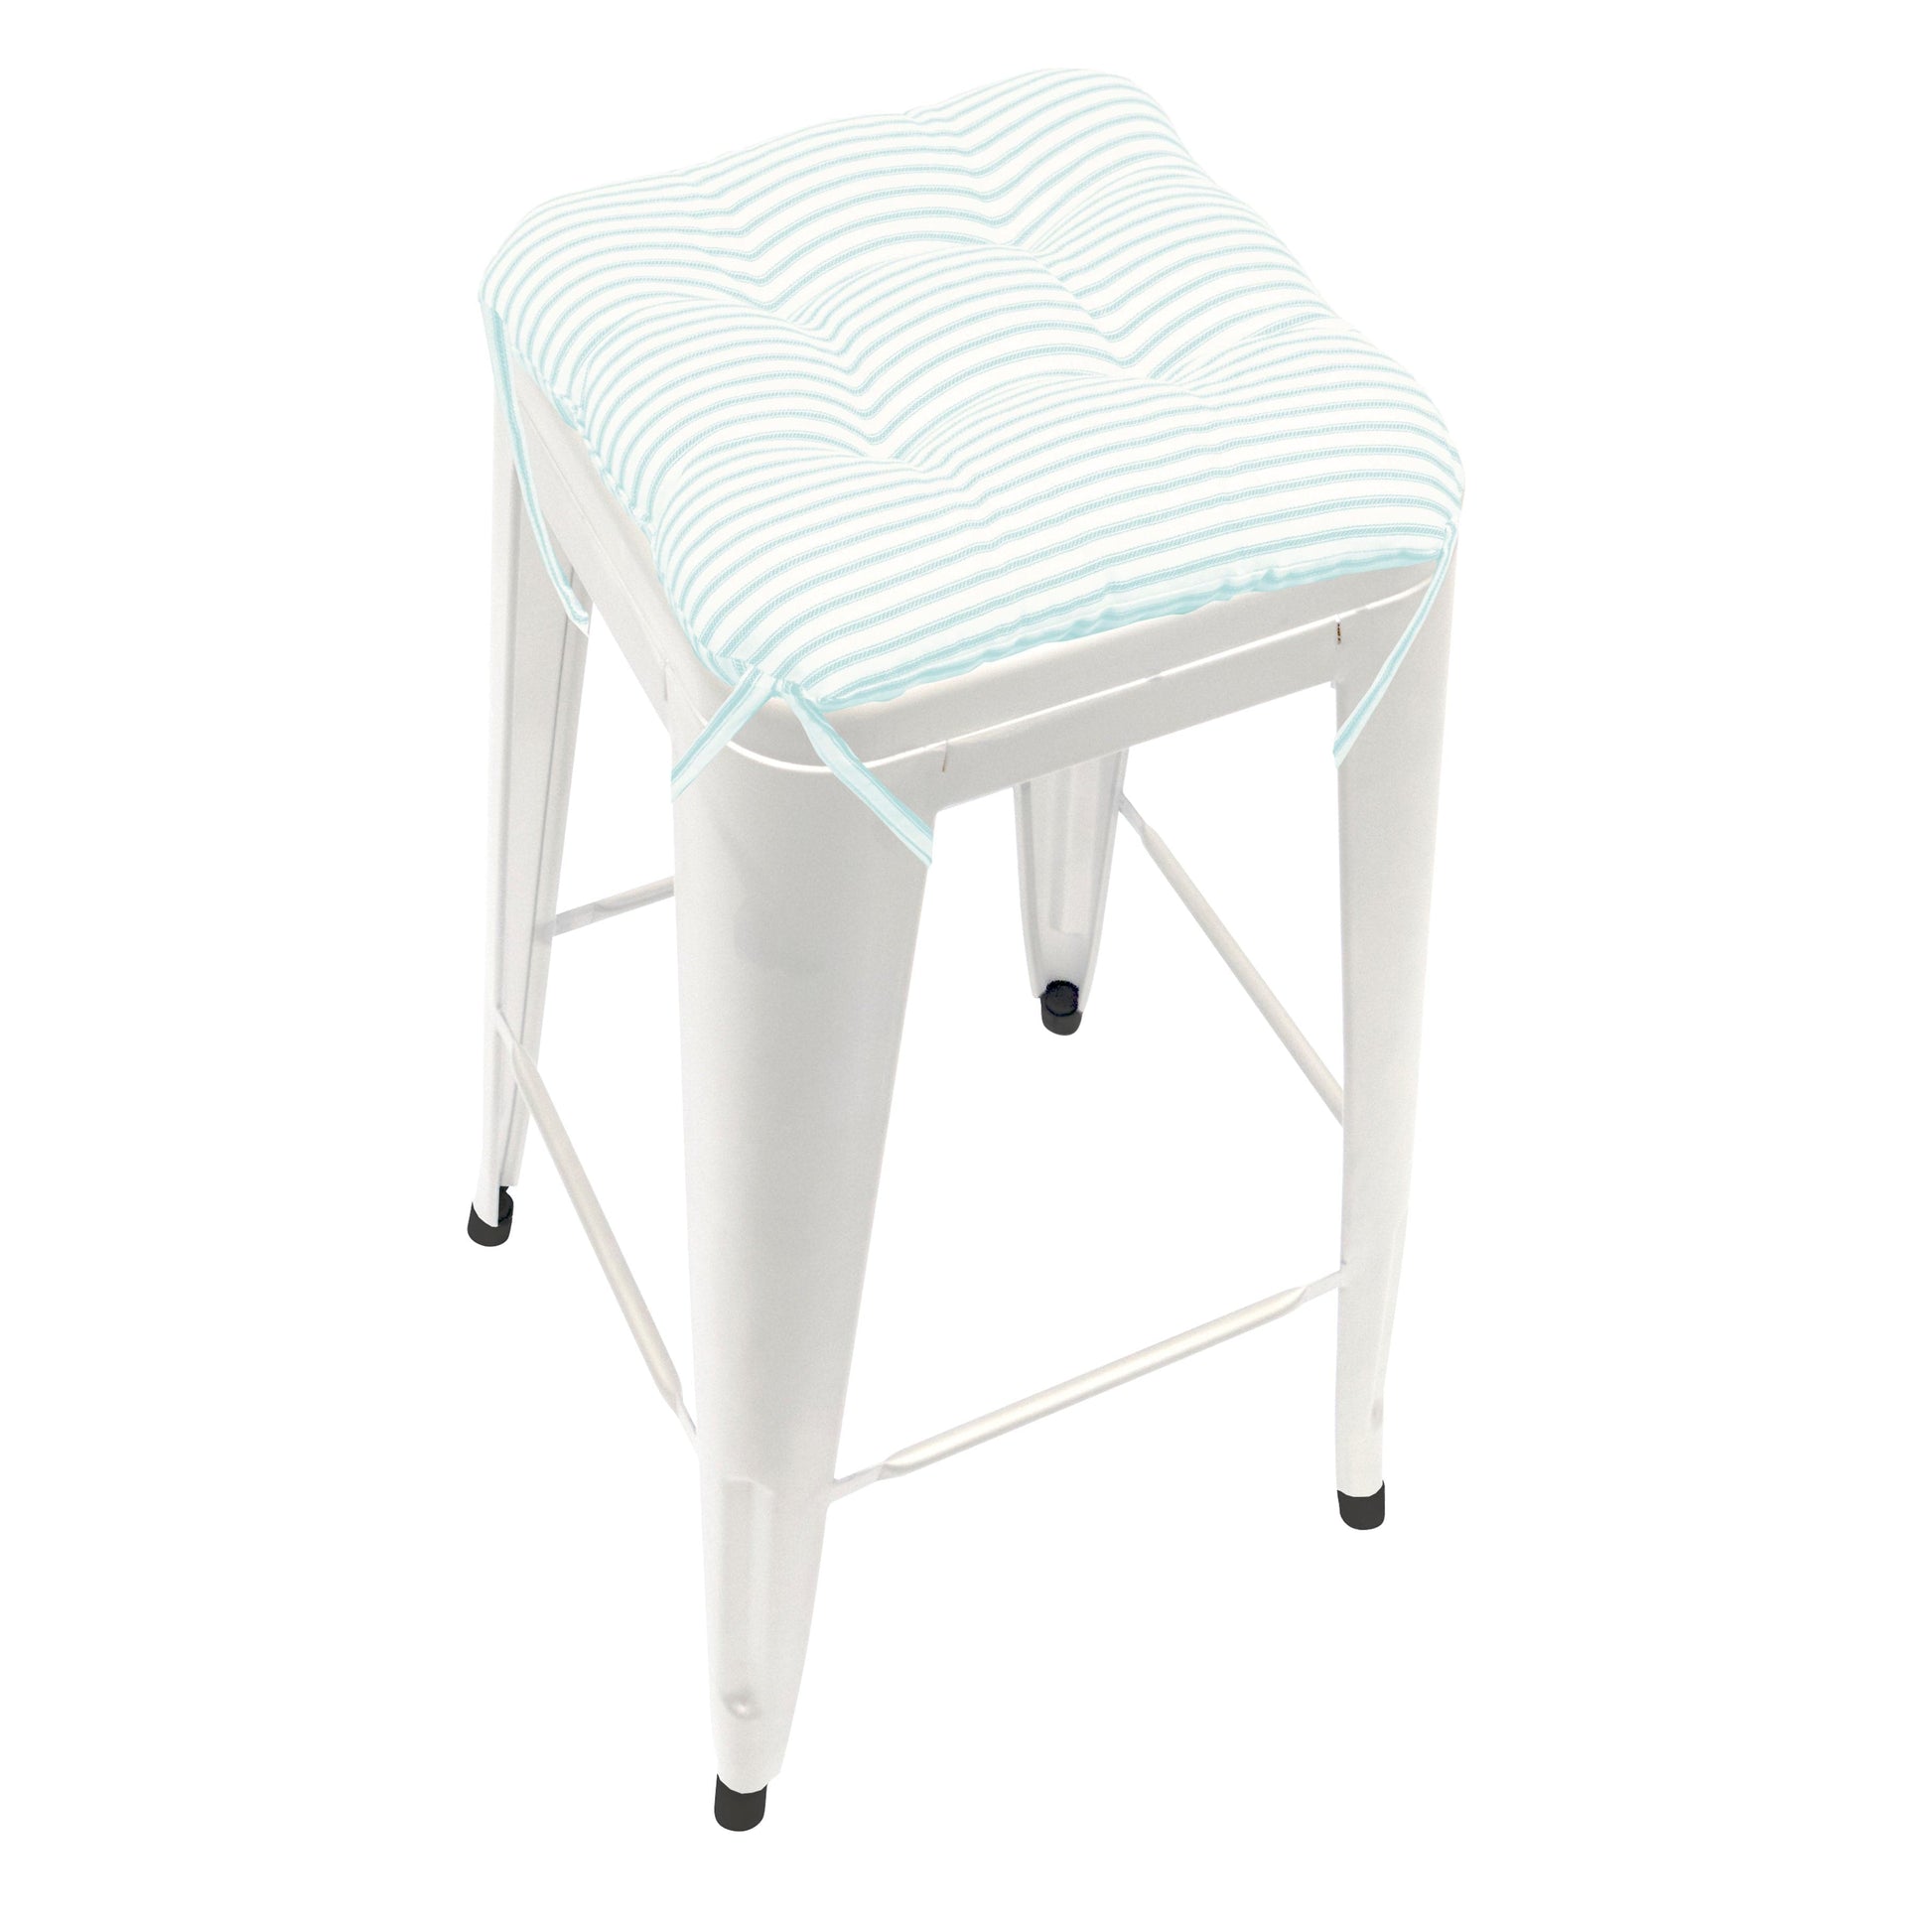 Micro-suede Turquoise Square Industrial Bar Stool Cushion - 12